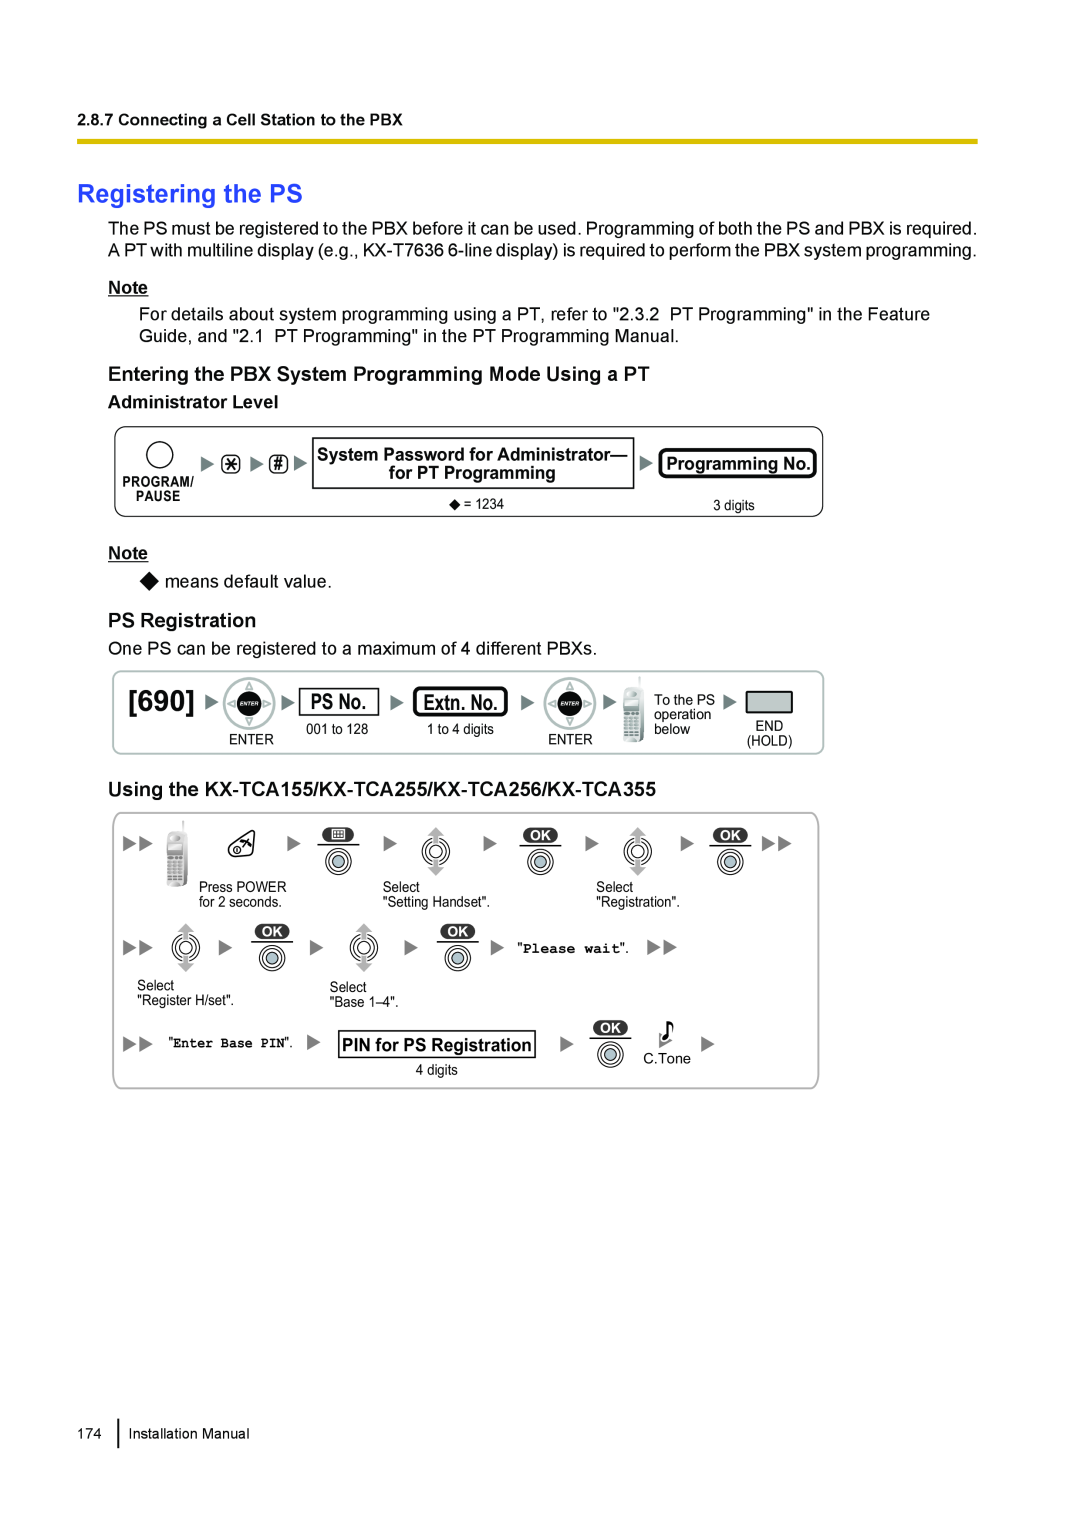 Panasonic KX-TDA100 Registering the PS, PS No, Entering the PBX System Programming Mode Using a PT, PS Registration 